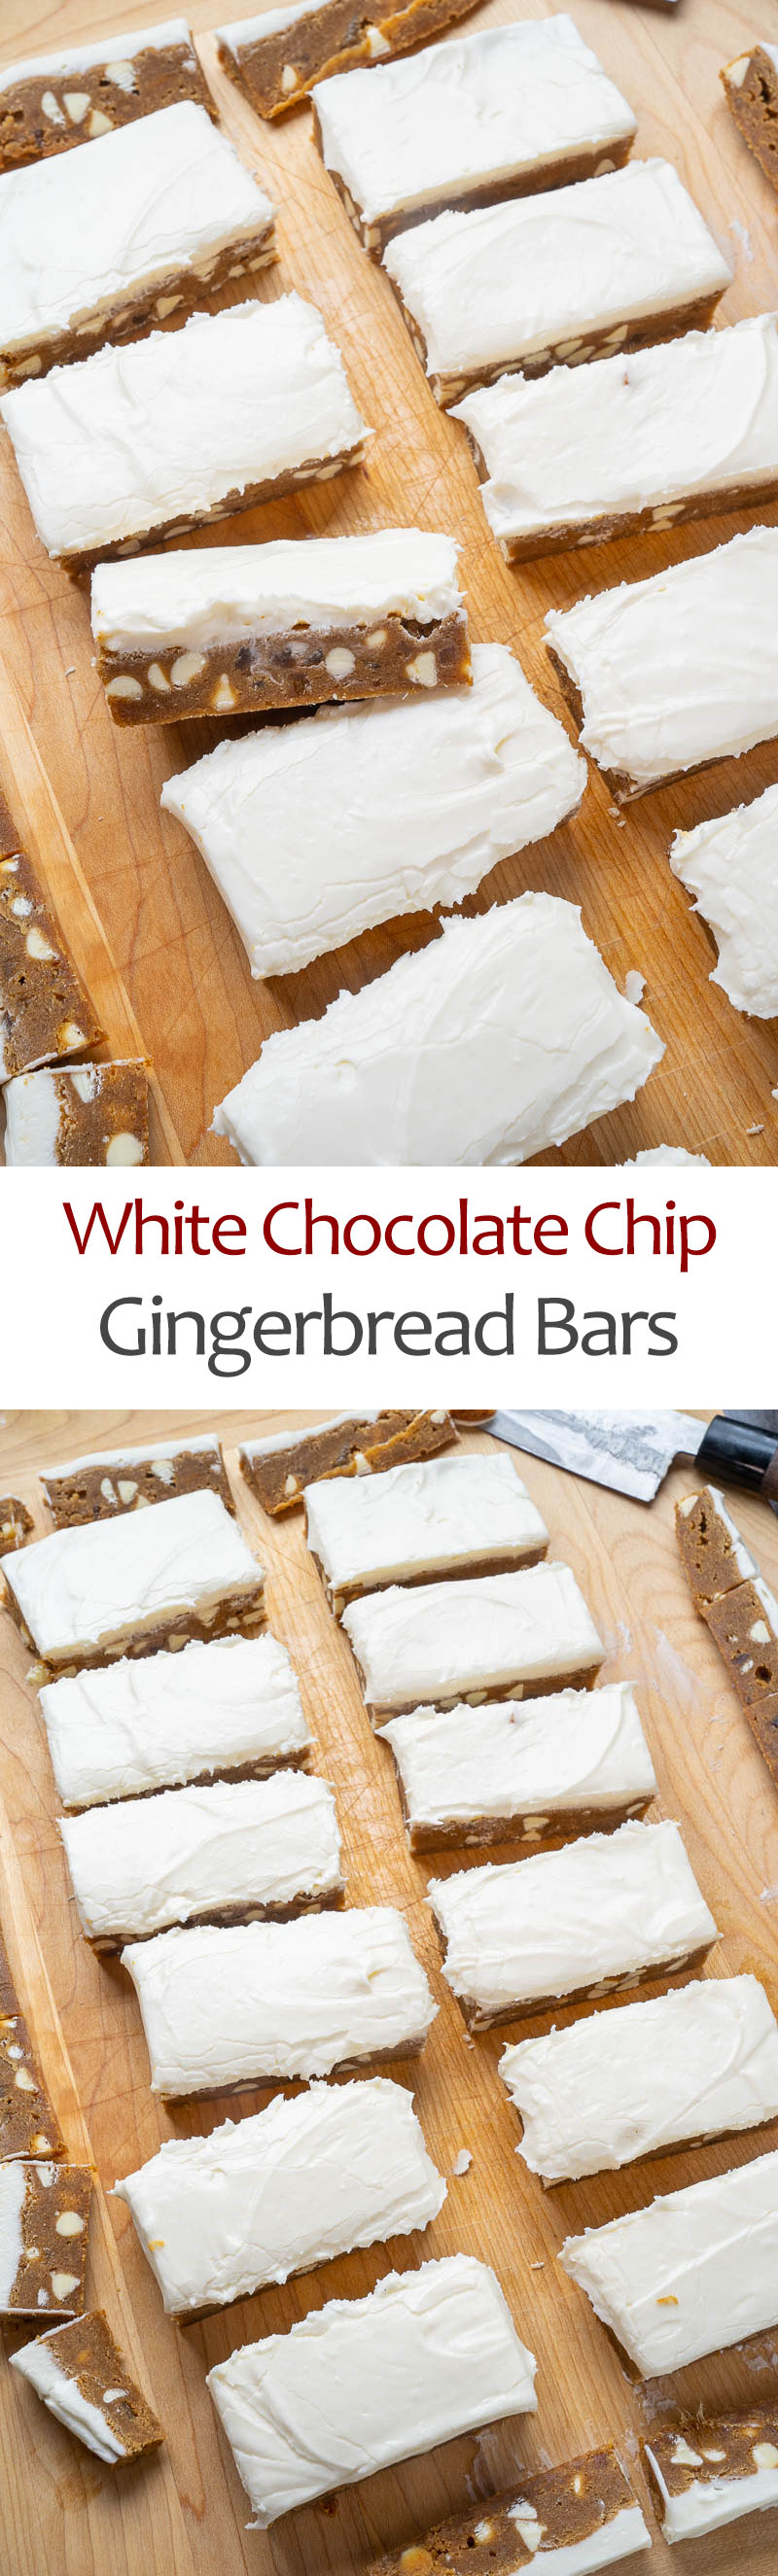 White Chocolate Chip Gingerbread Bars